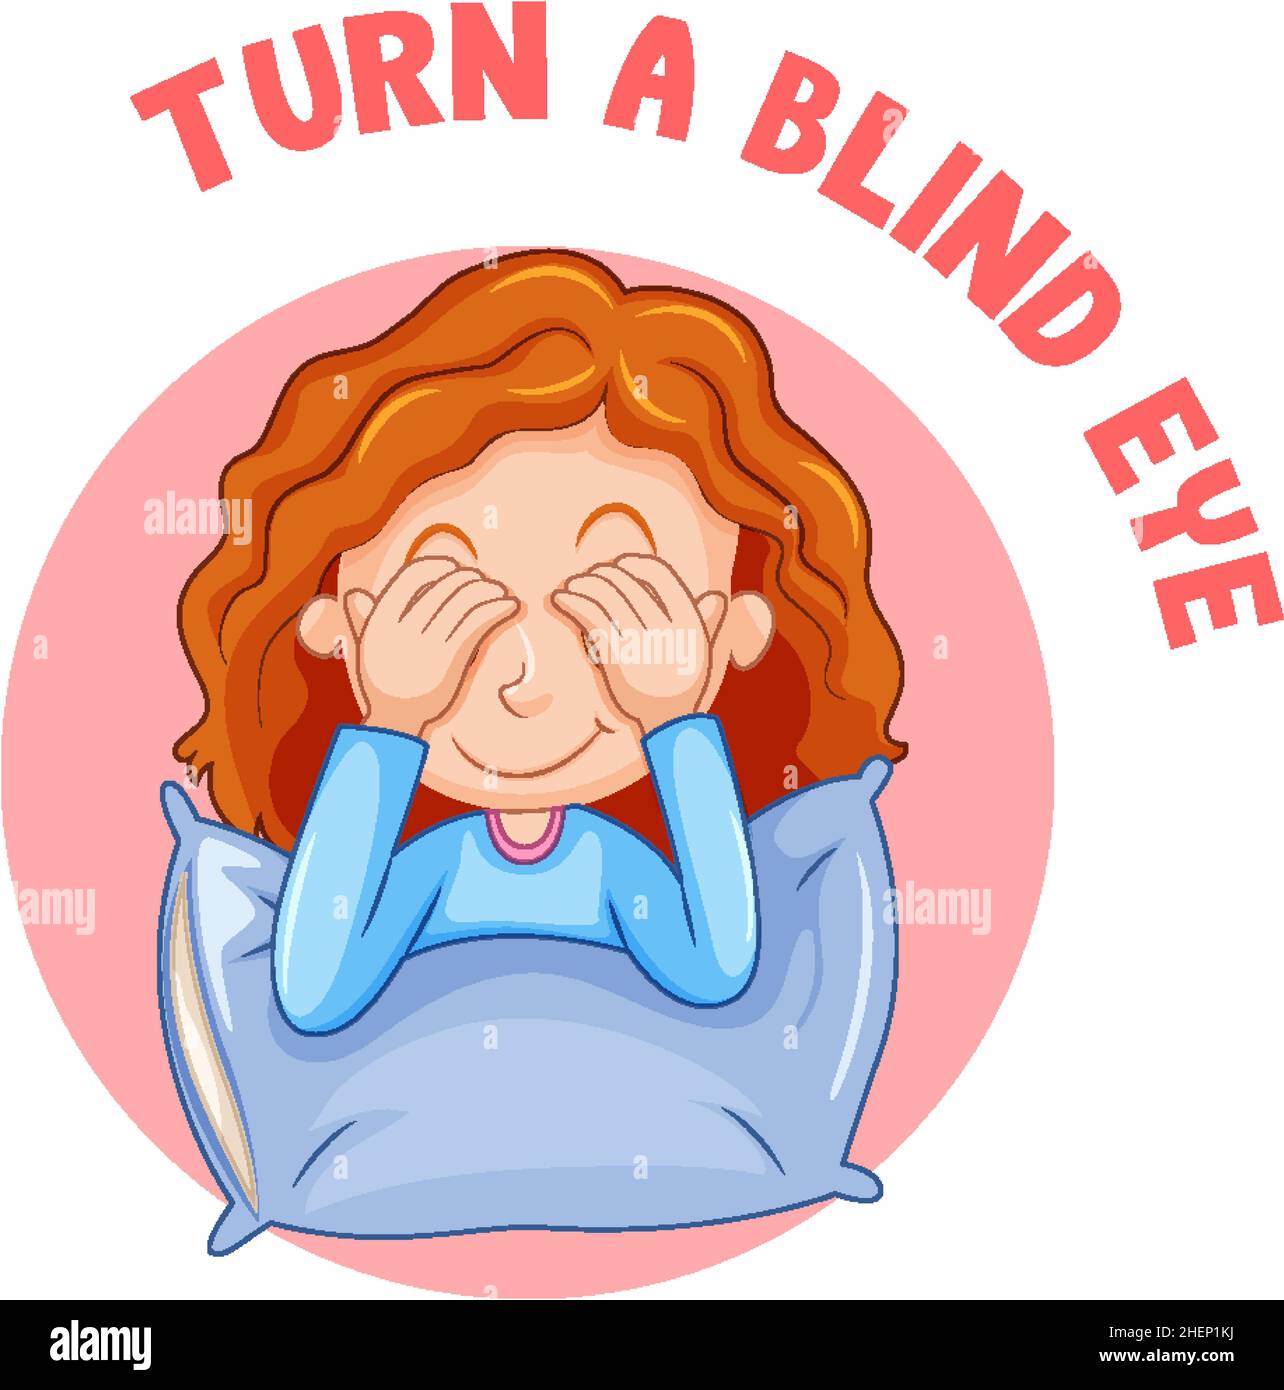 English idiom with picture description for turn a blind eye illustration Stock Vector